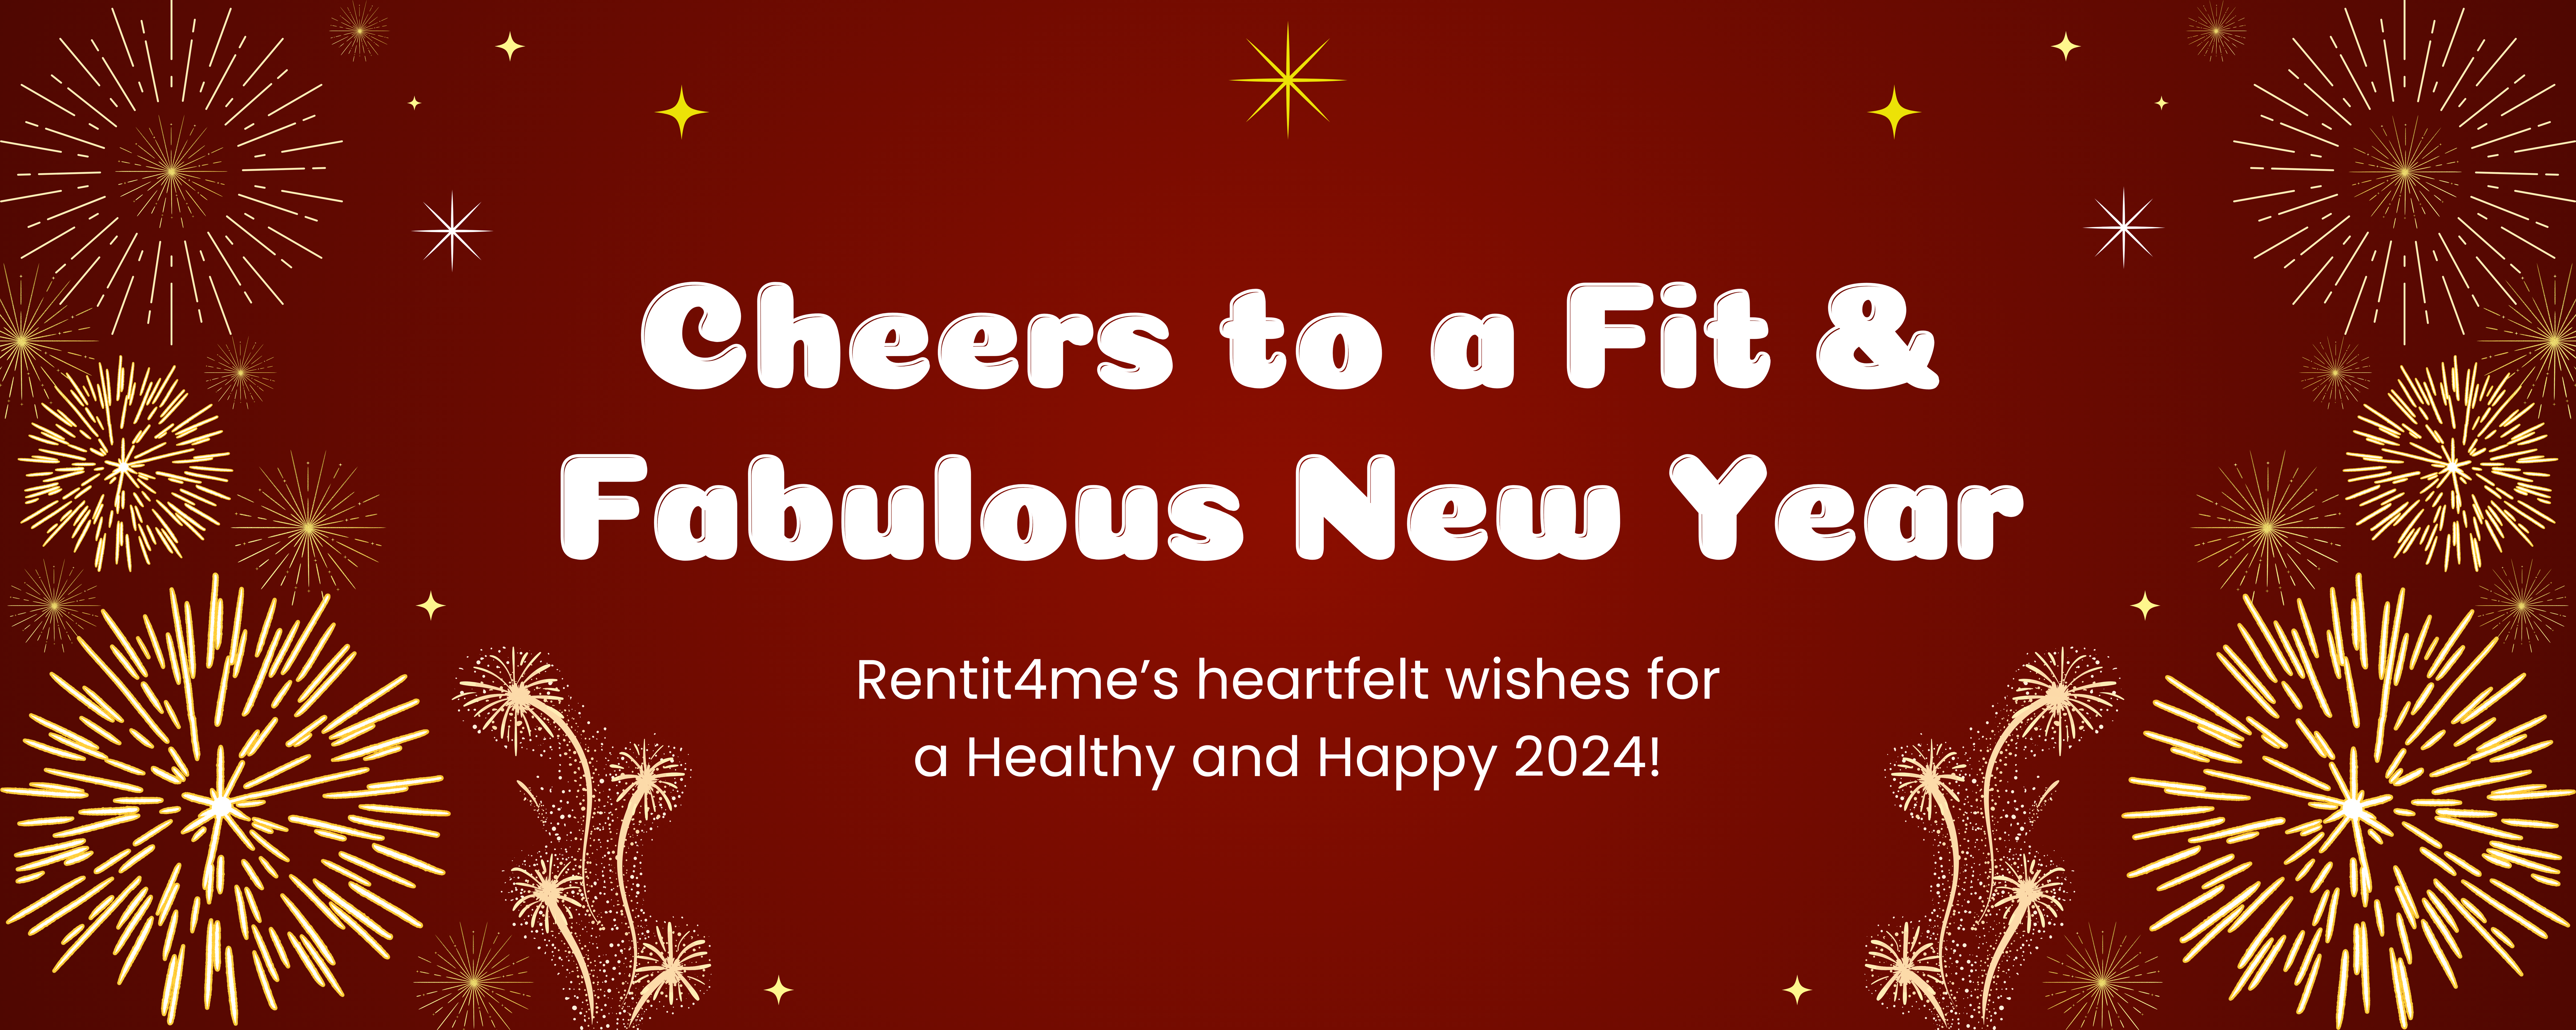 Cheers to a Fit and Fabulous New Year: Rentit4me's Heartfelt Wishes for a Healthy and Happy 2024!!